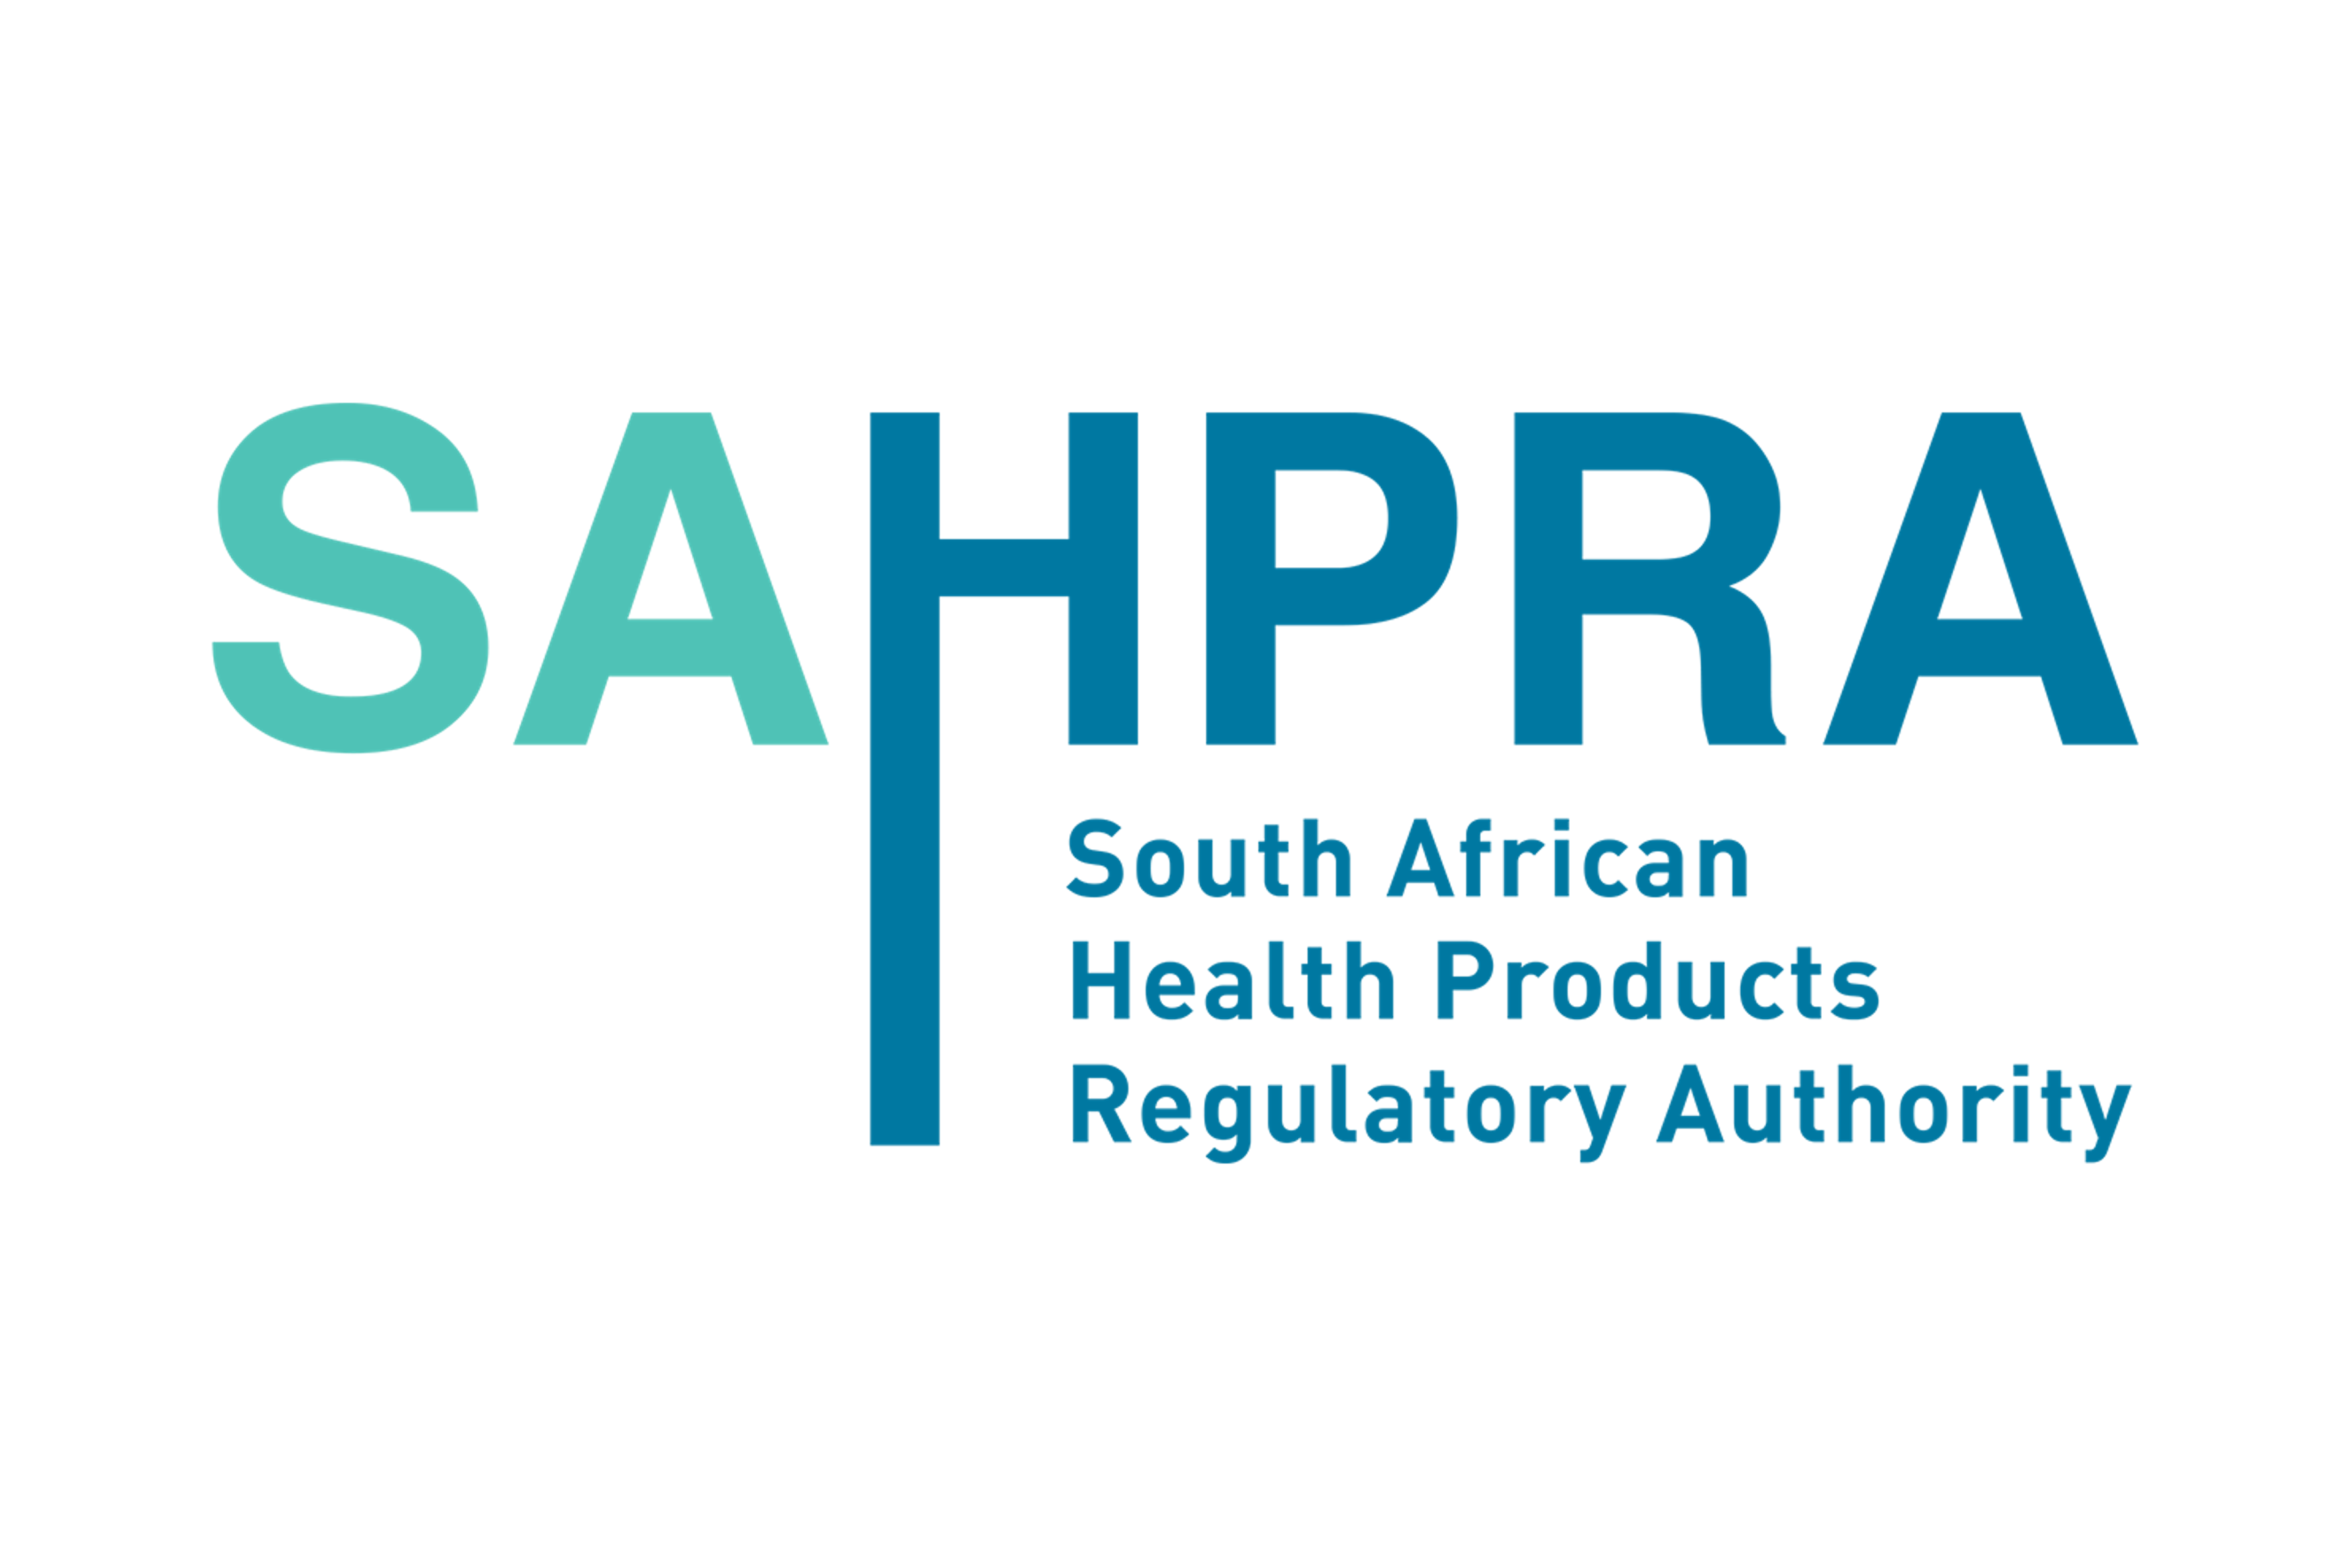 The South African Health Products Regulatory Authority